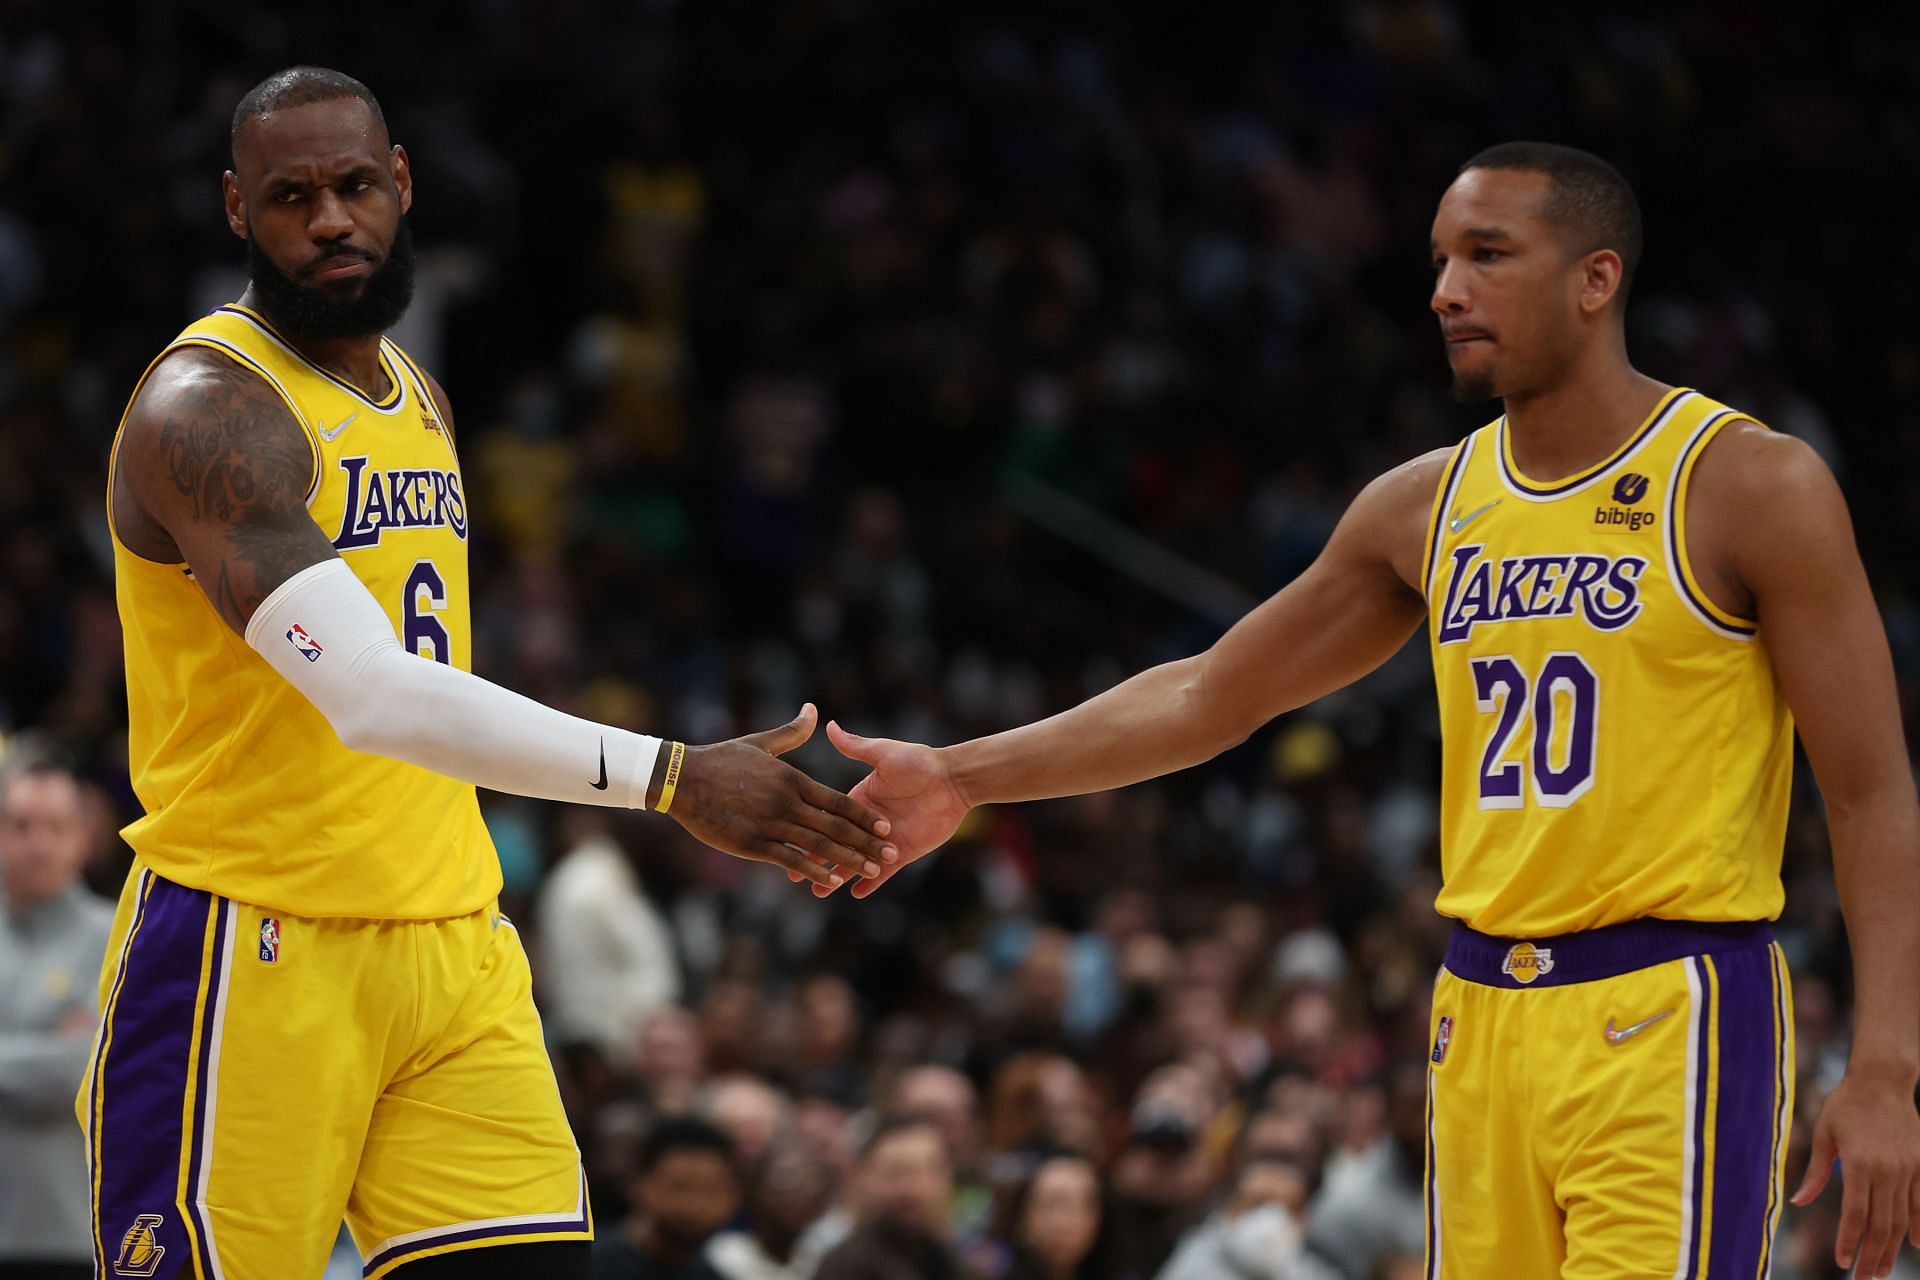 Los Angeles Lakers superstar forward LeBron James has impressed this year